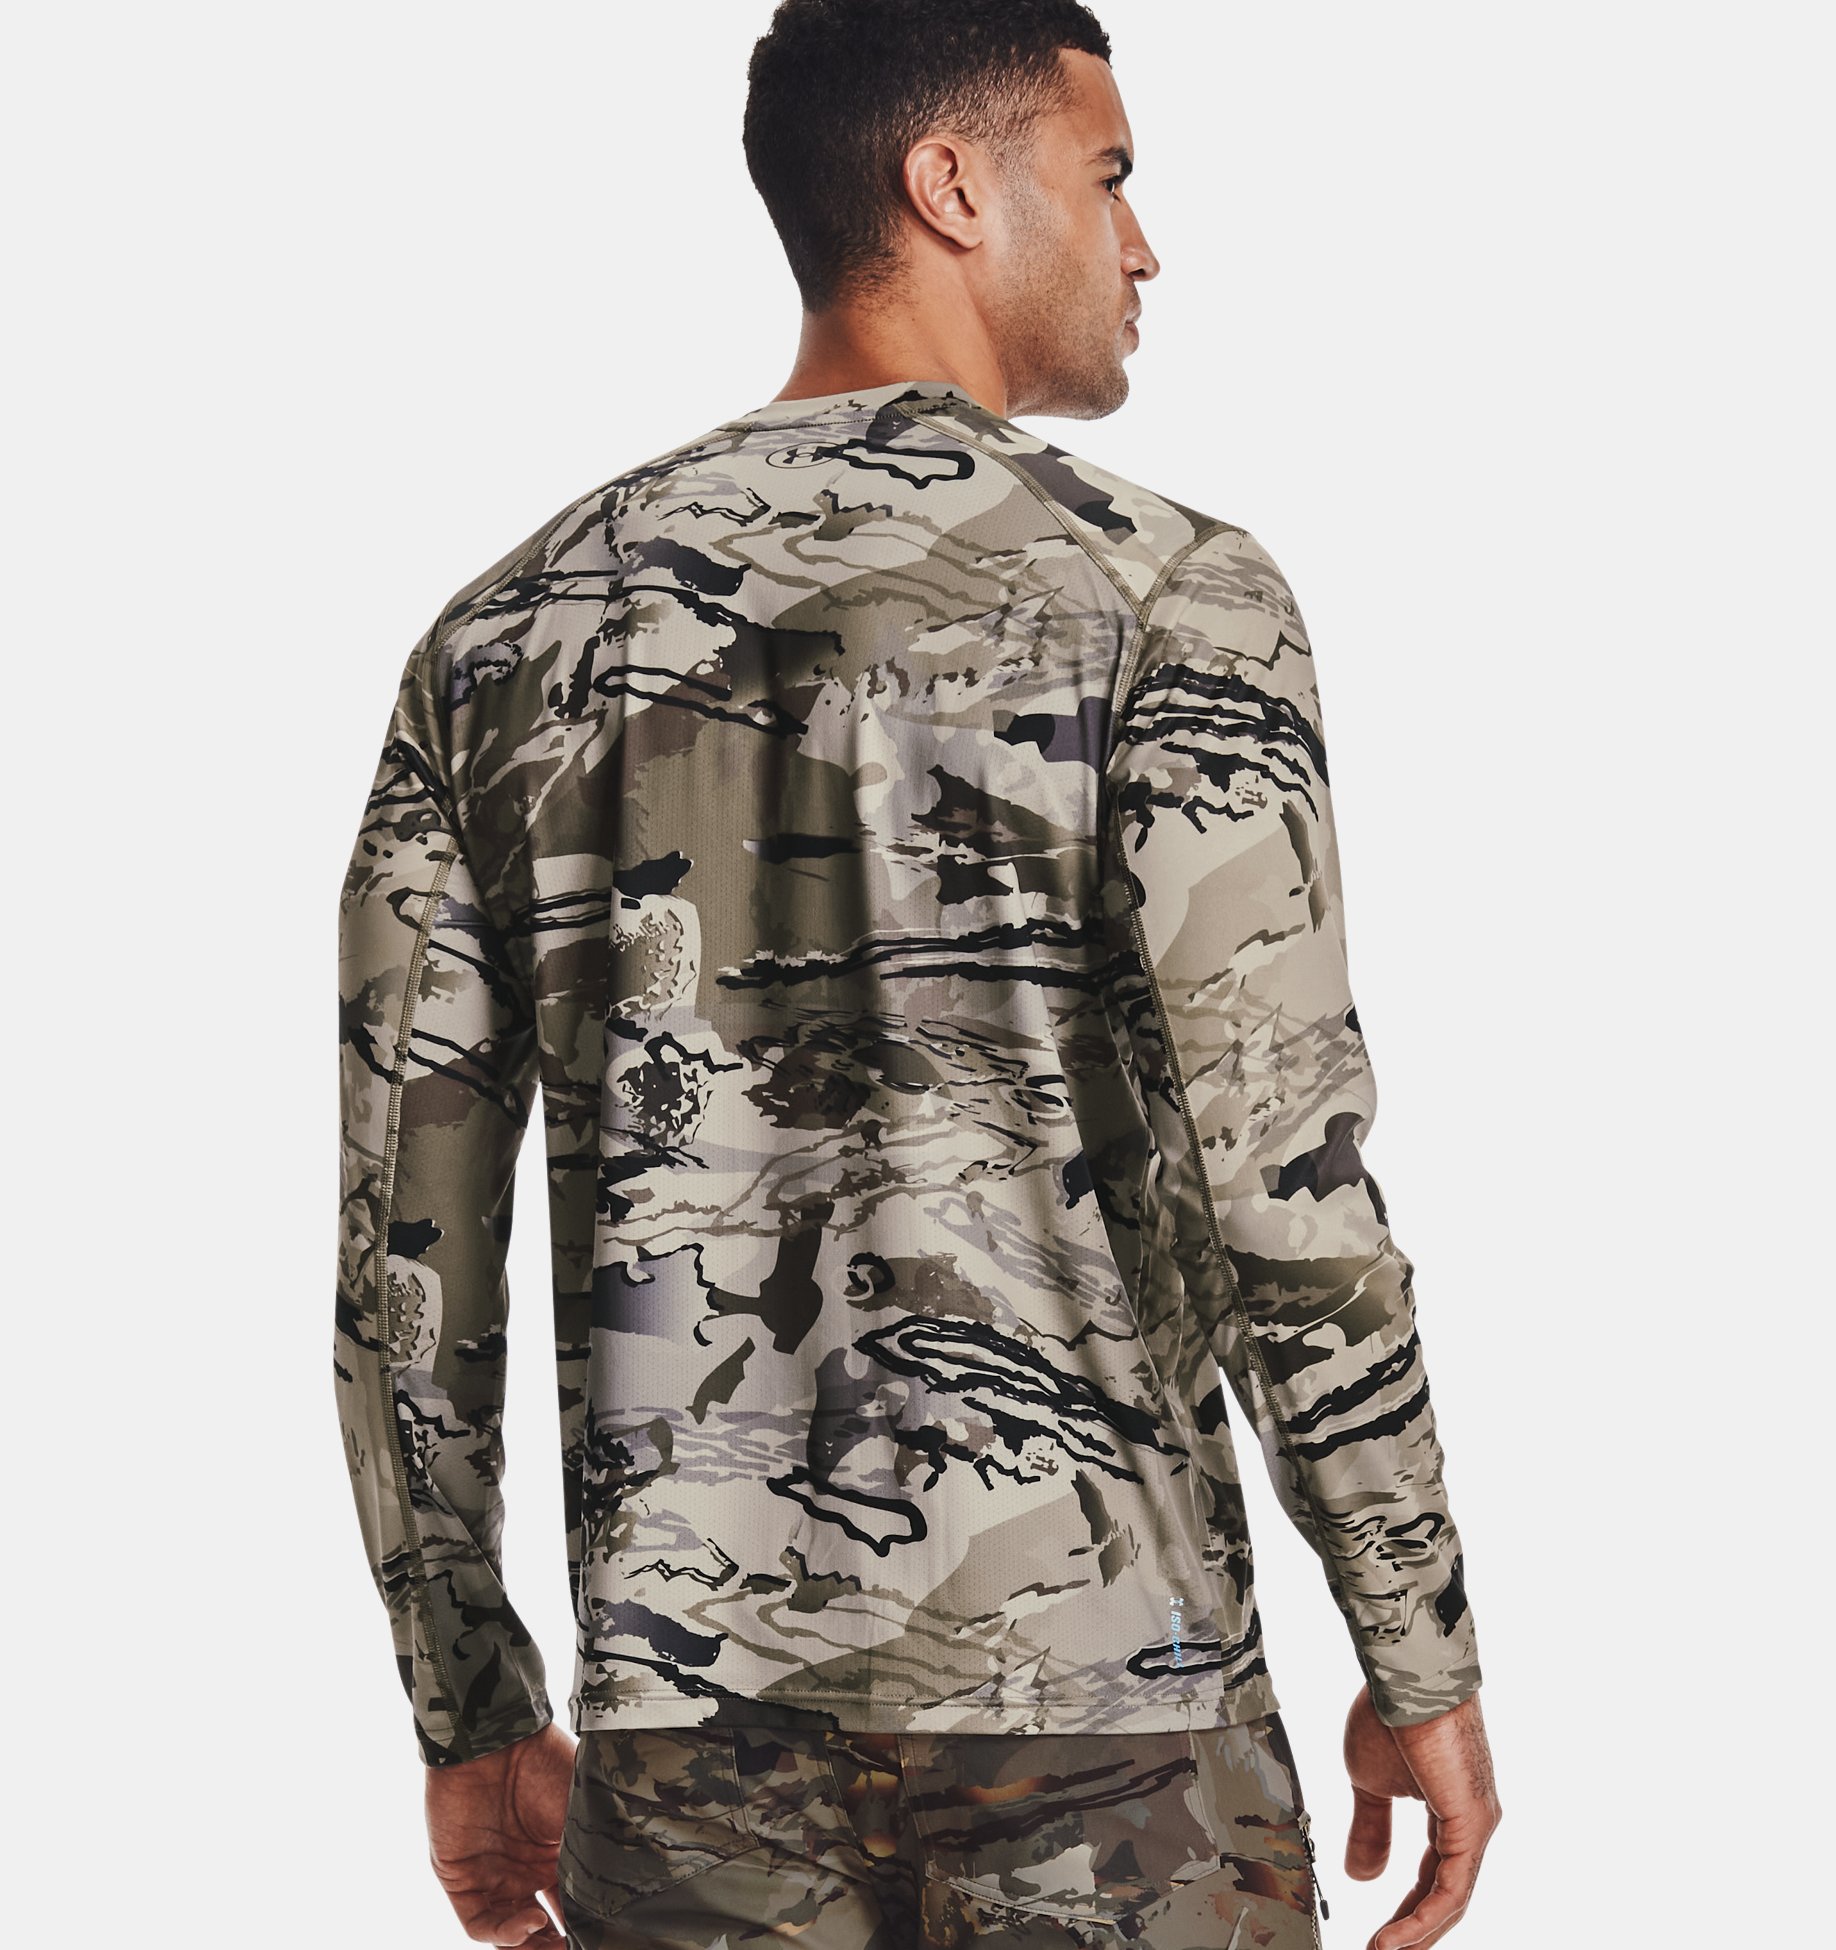 UA Under Armour Men’s Long Sleeve Shirt Size M ISO-Chill BrushLine Forest Camo 